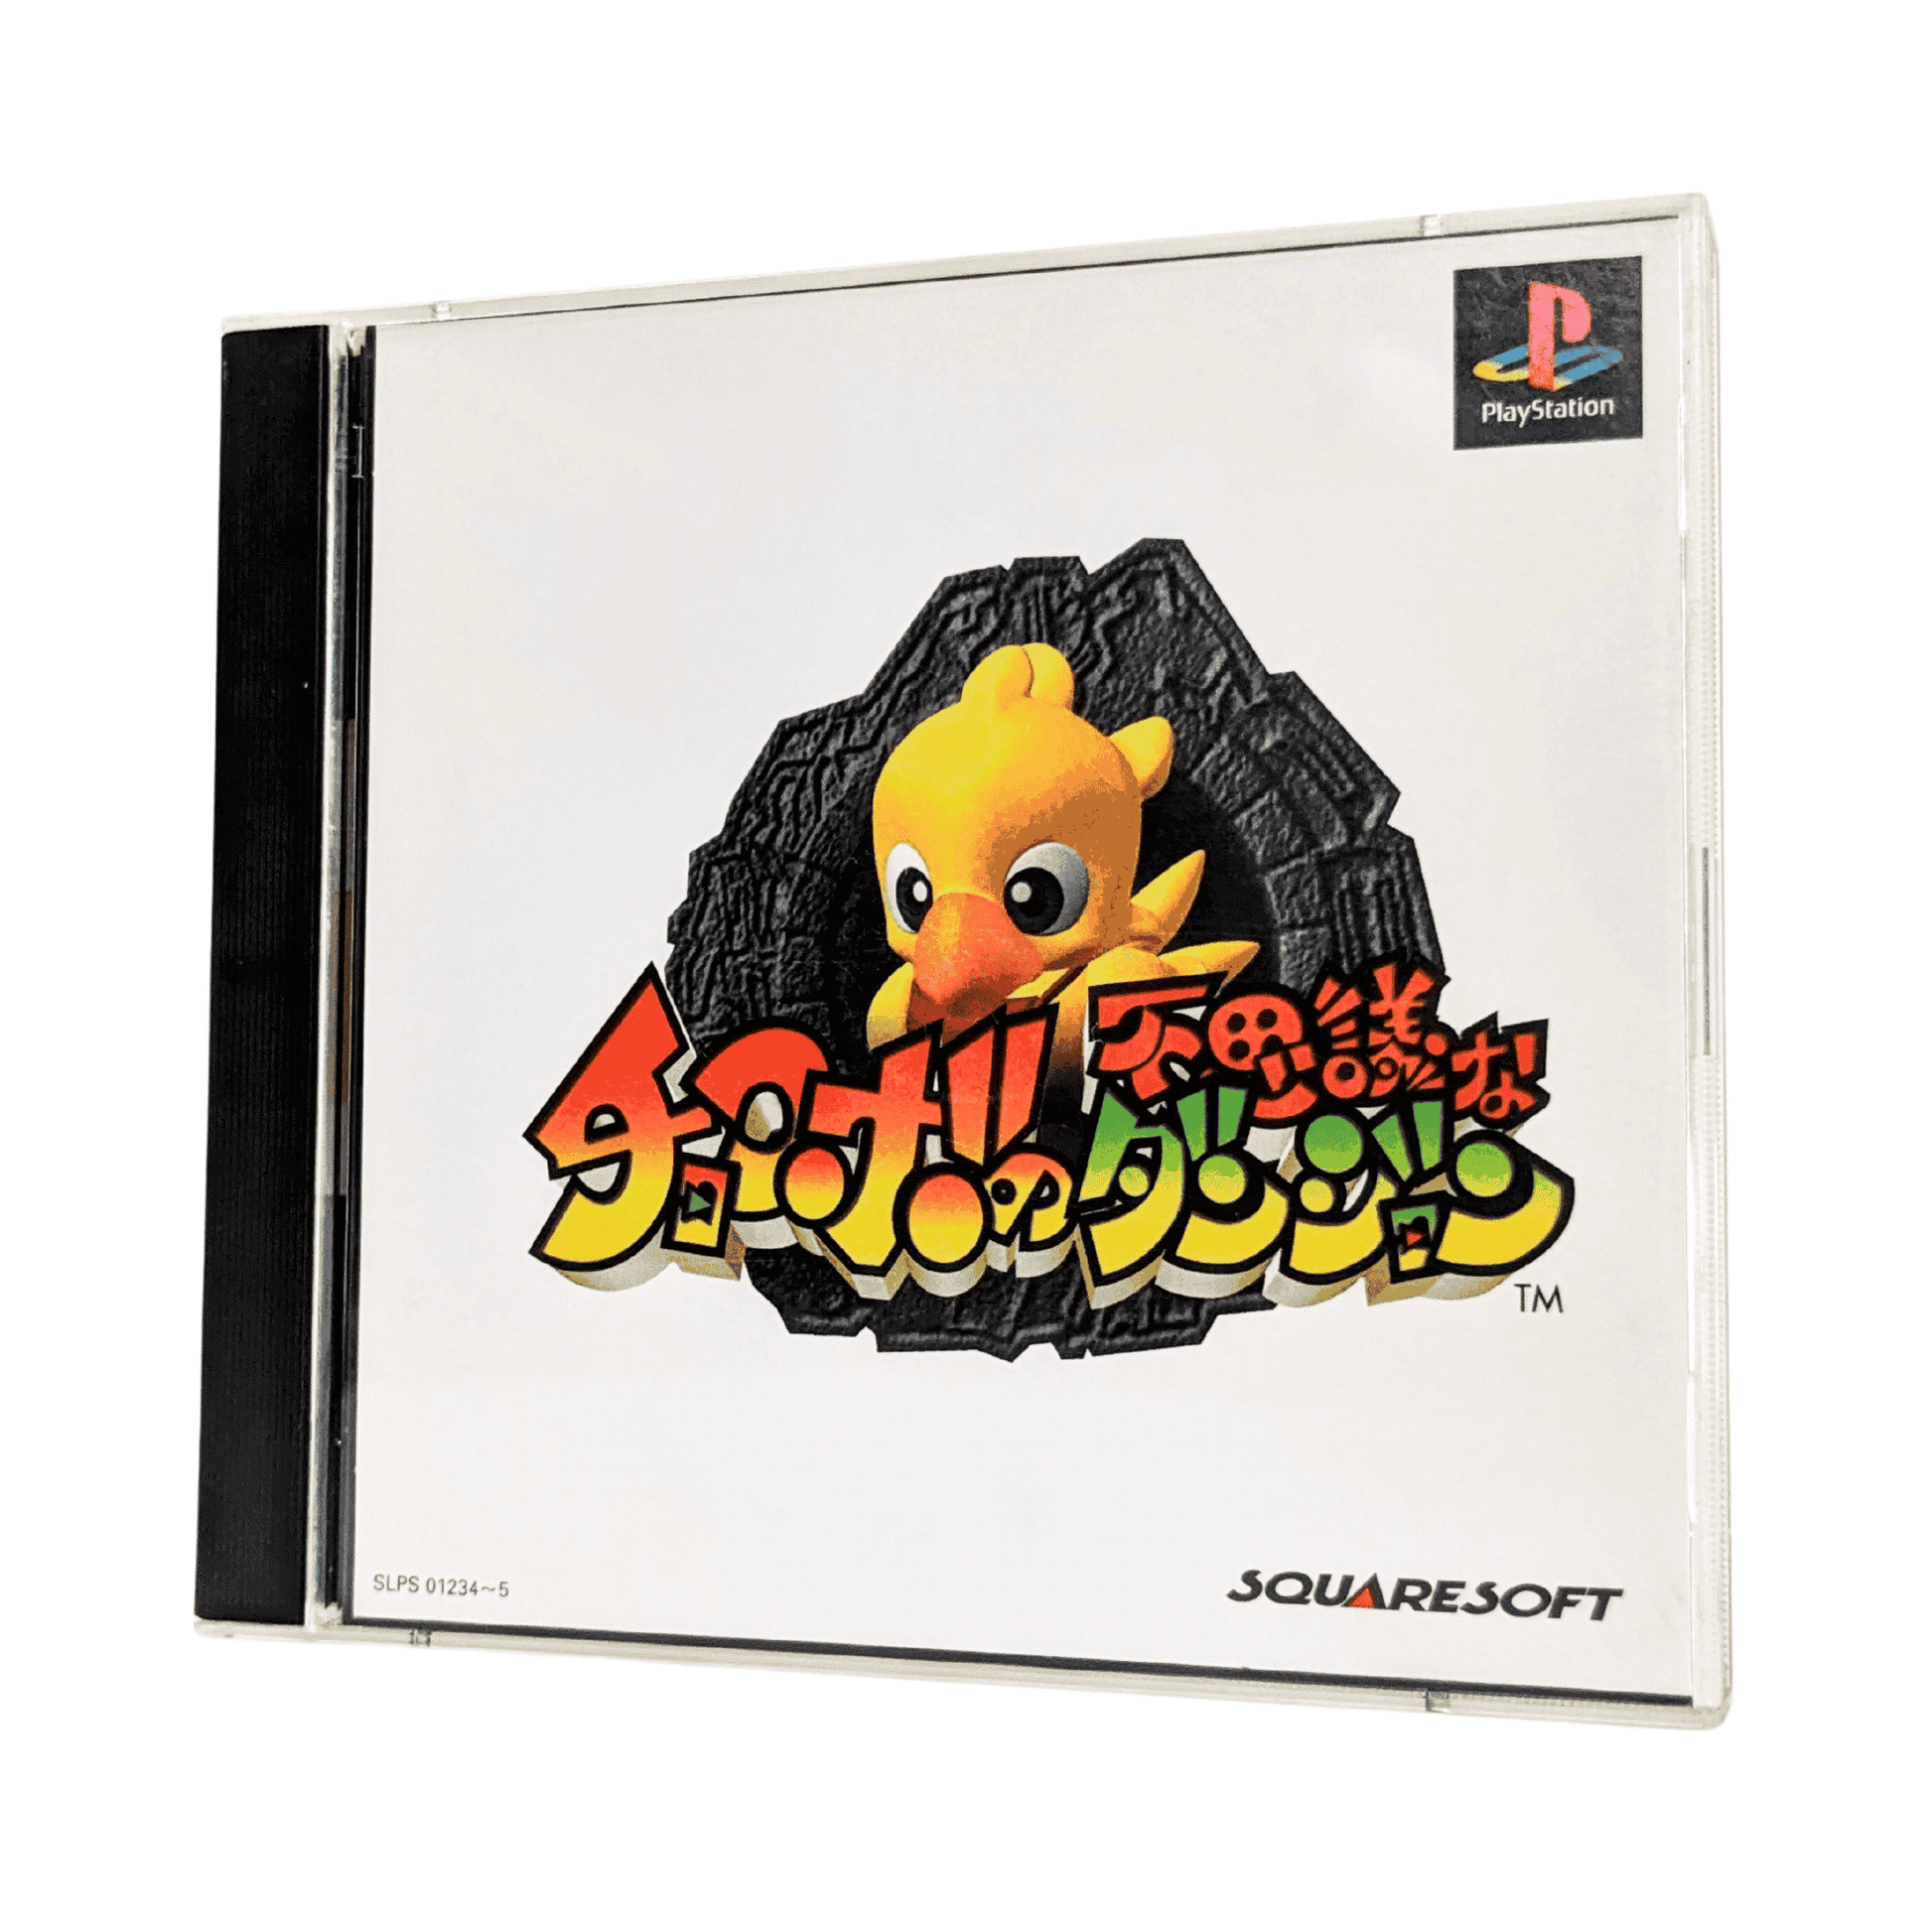 Final Fantasy Fables: Chocobo’s Dungeon | playstation ChitoroShop